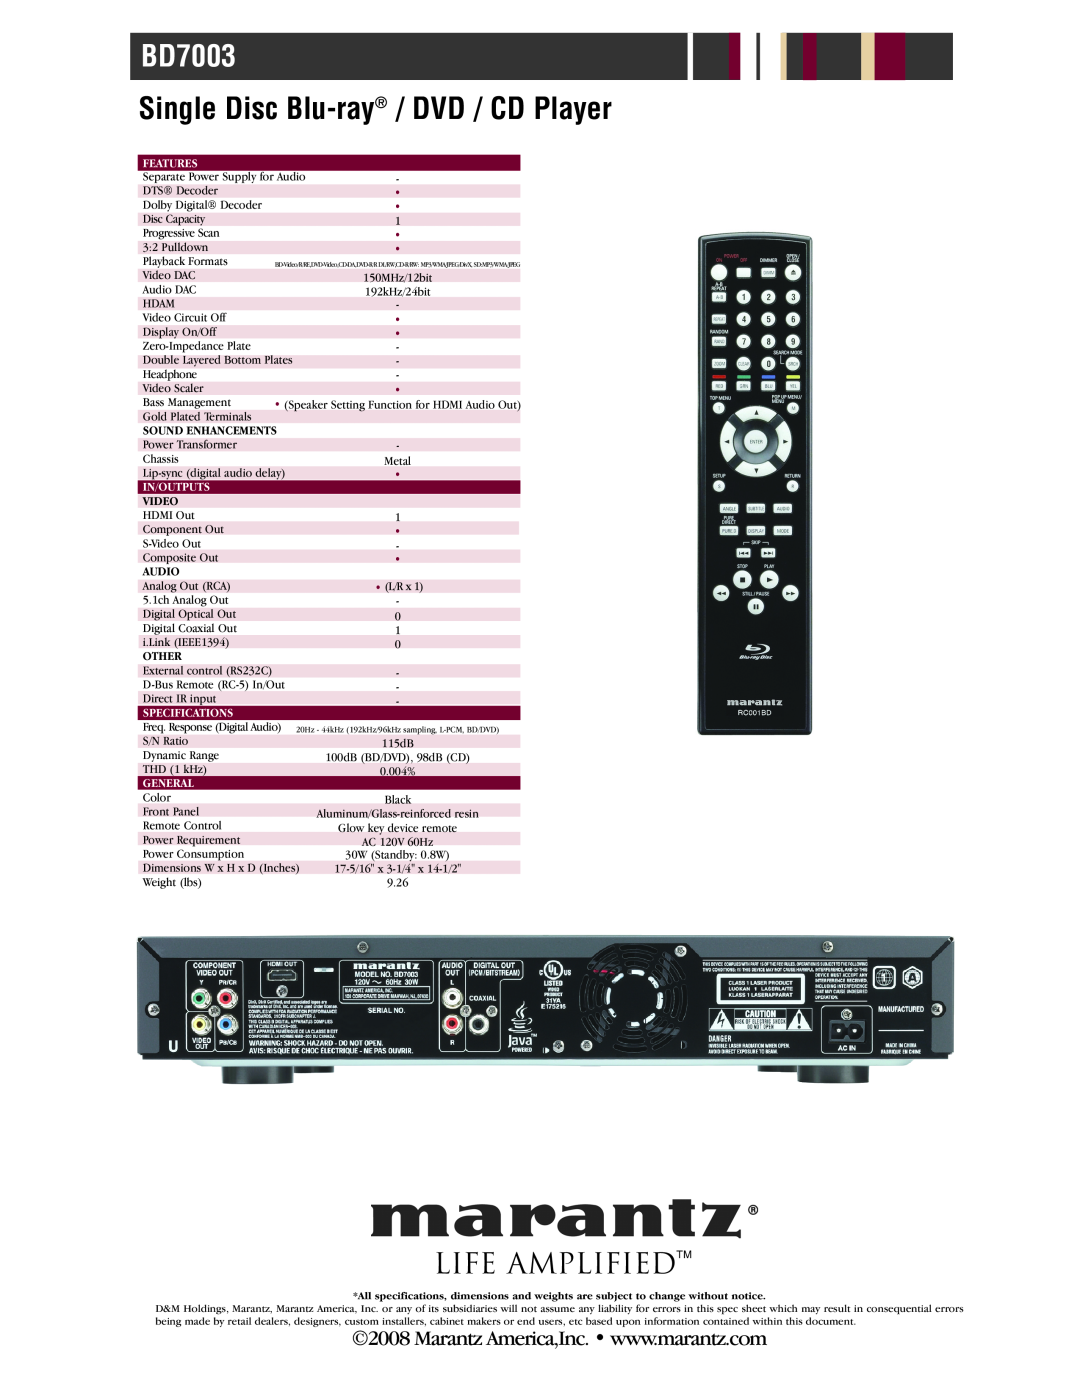 Marantz BD7003 Single Disc Blu-ray / DVD / CD Player, Life Amplifiedtm, Features, Sound Enhancements, In/Outputs, Video 